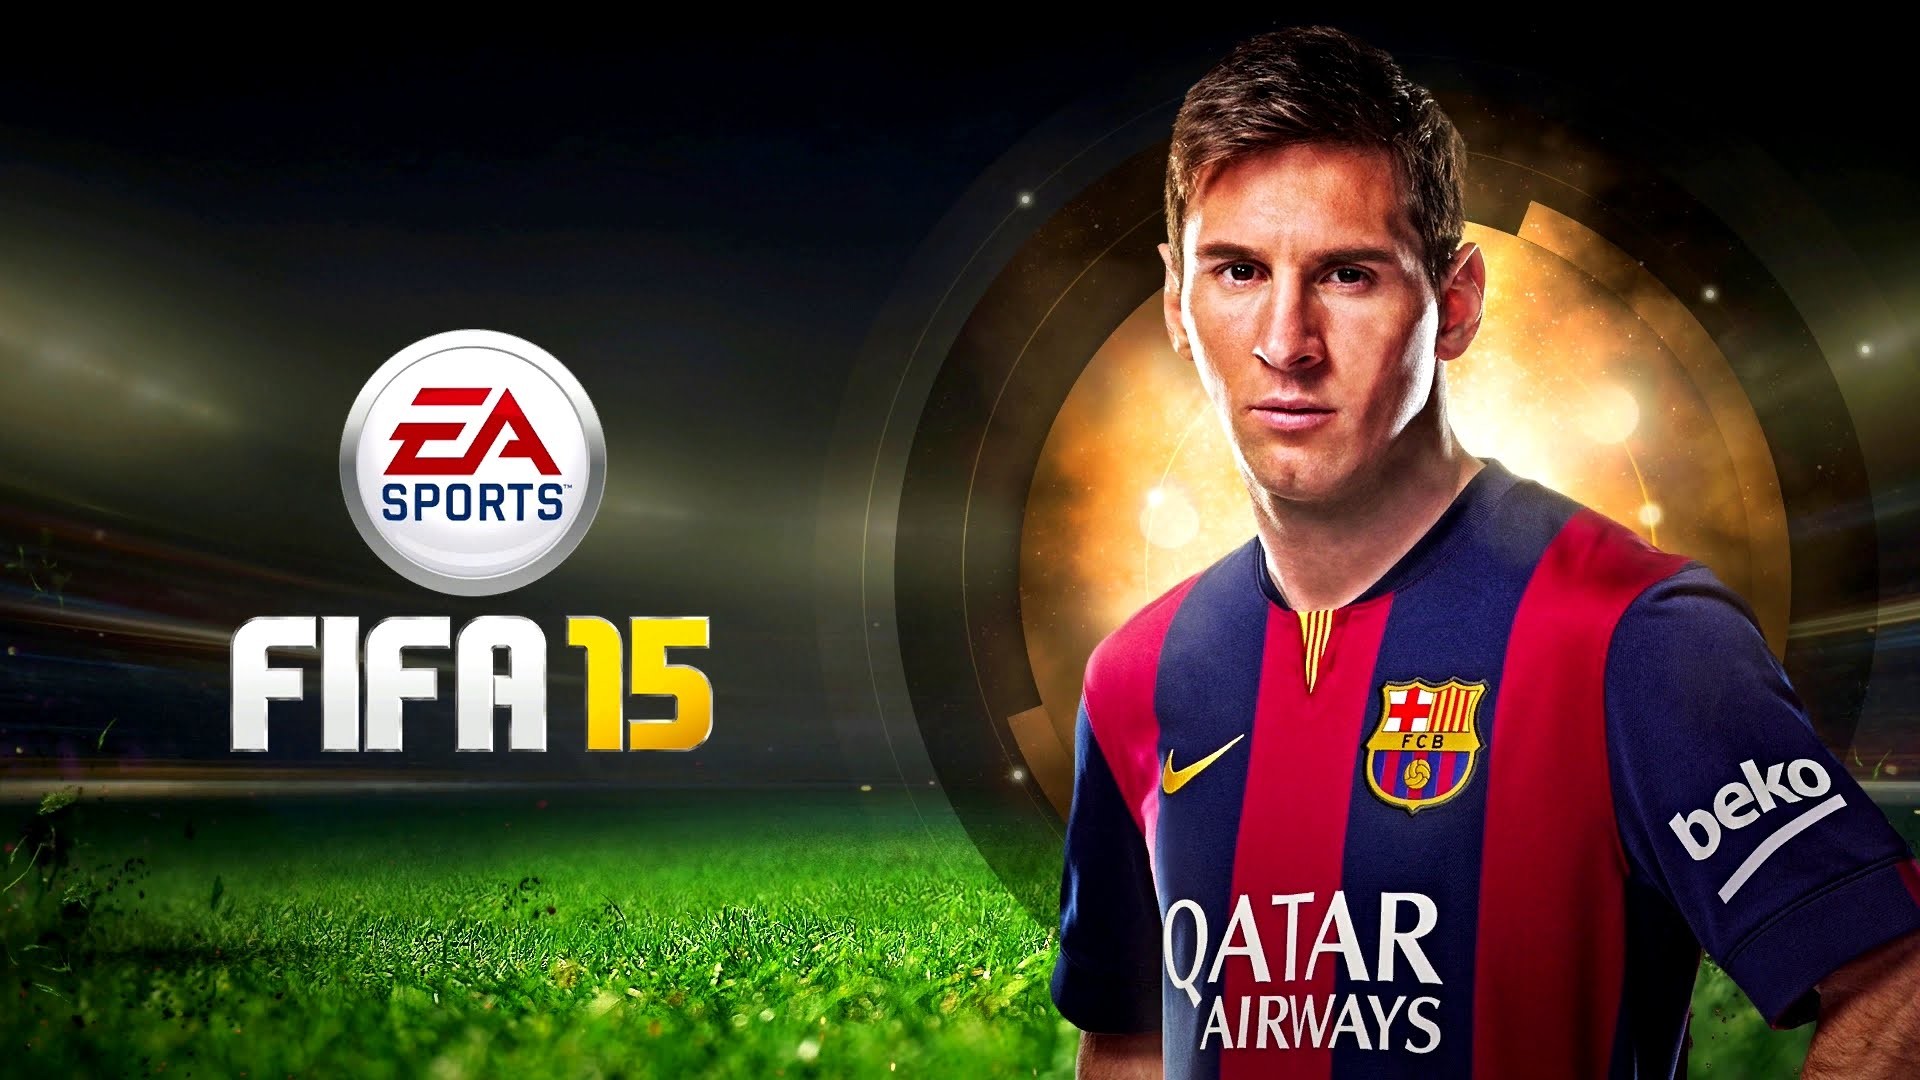 1920x1080 FIFA 15 Ultimate Team 1.4.4 Latest Version – Download and Install on Android